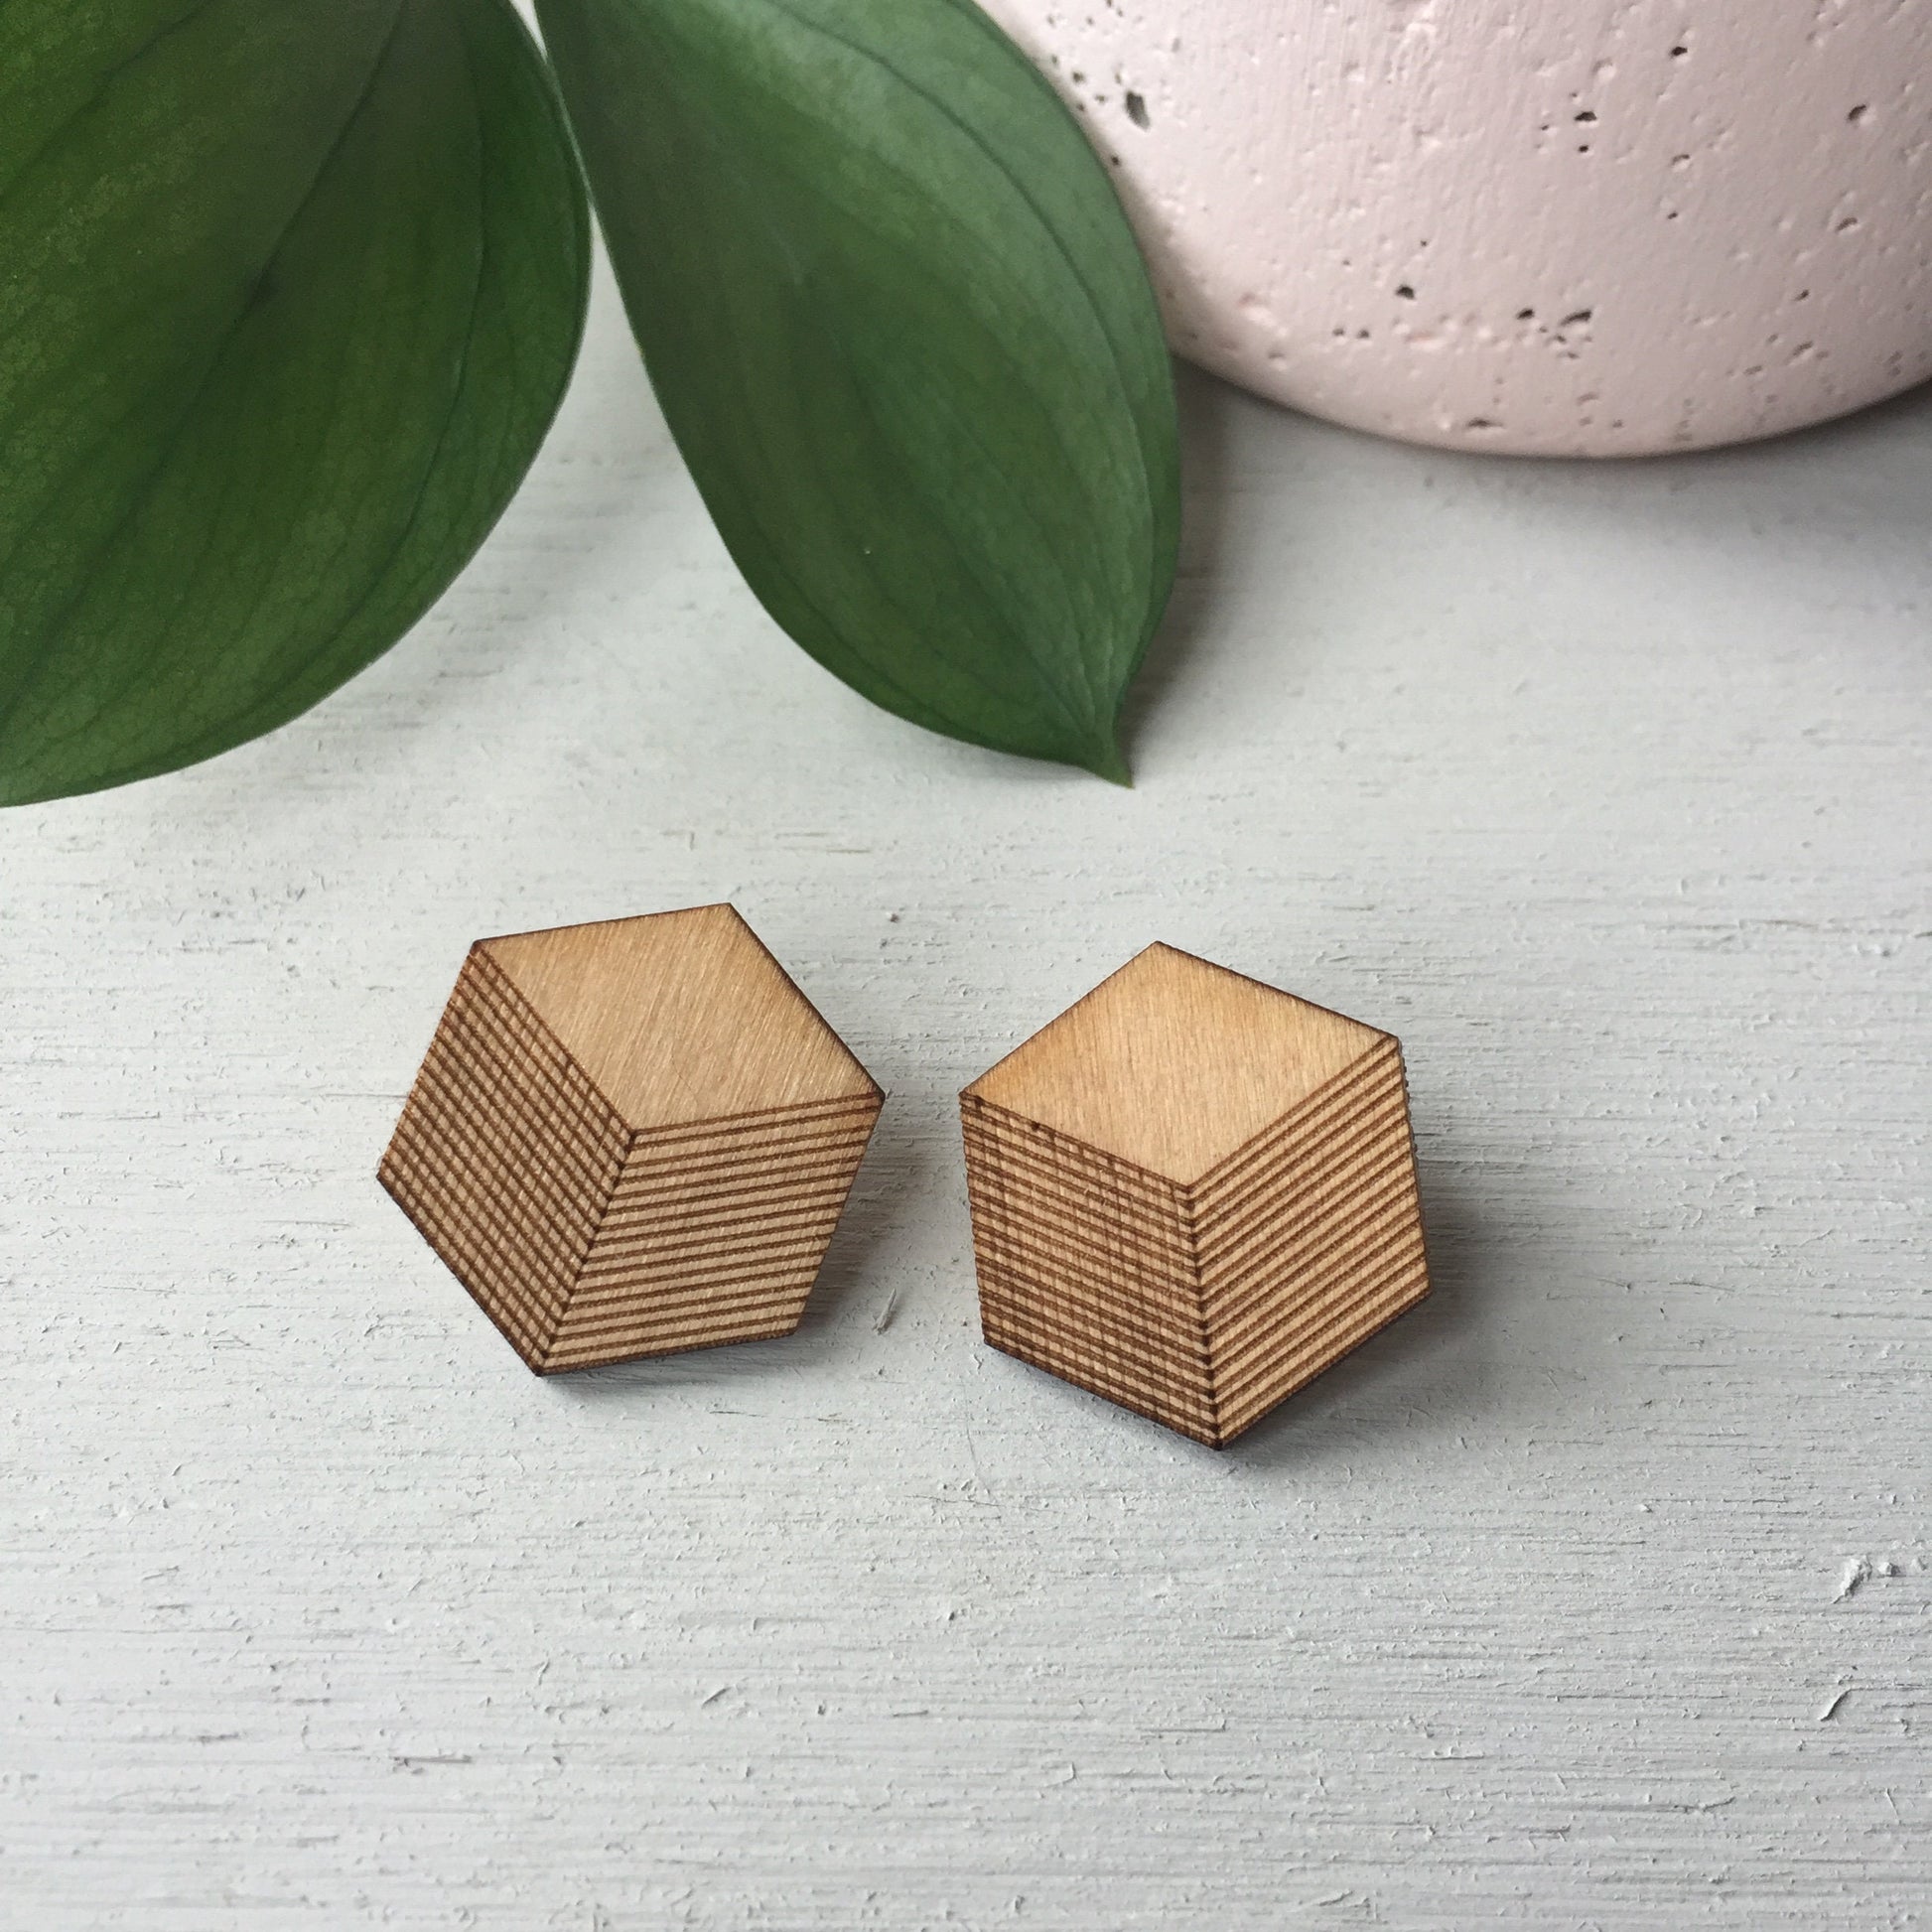 Large Cubes - Laser Cut Wood Earrings || Geometric Jewelry || Gift for Sister